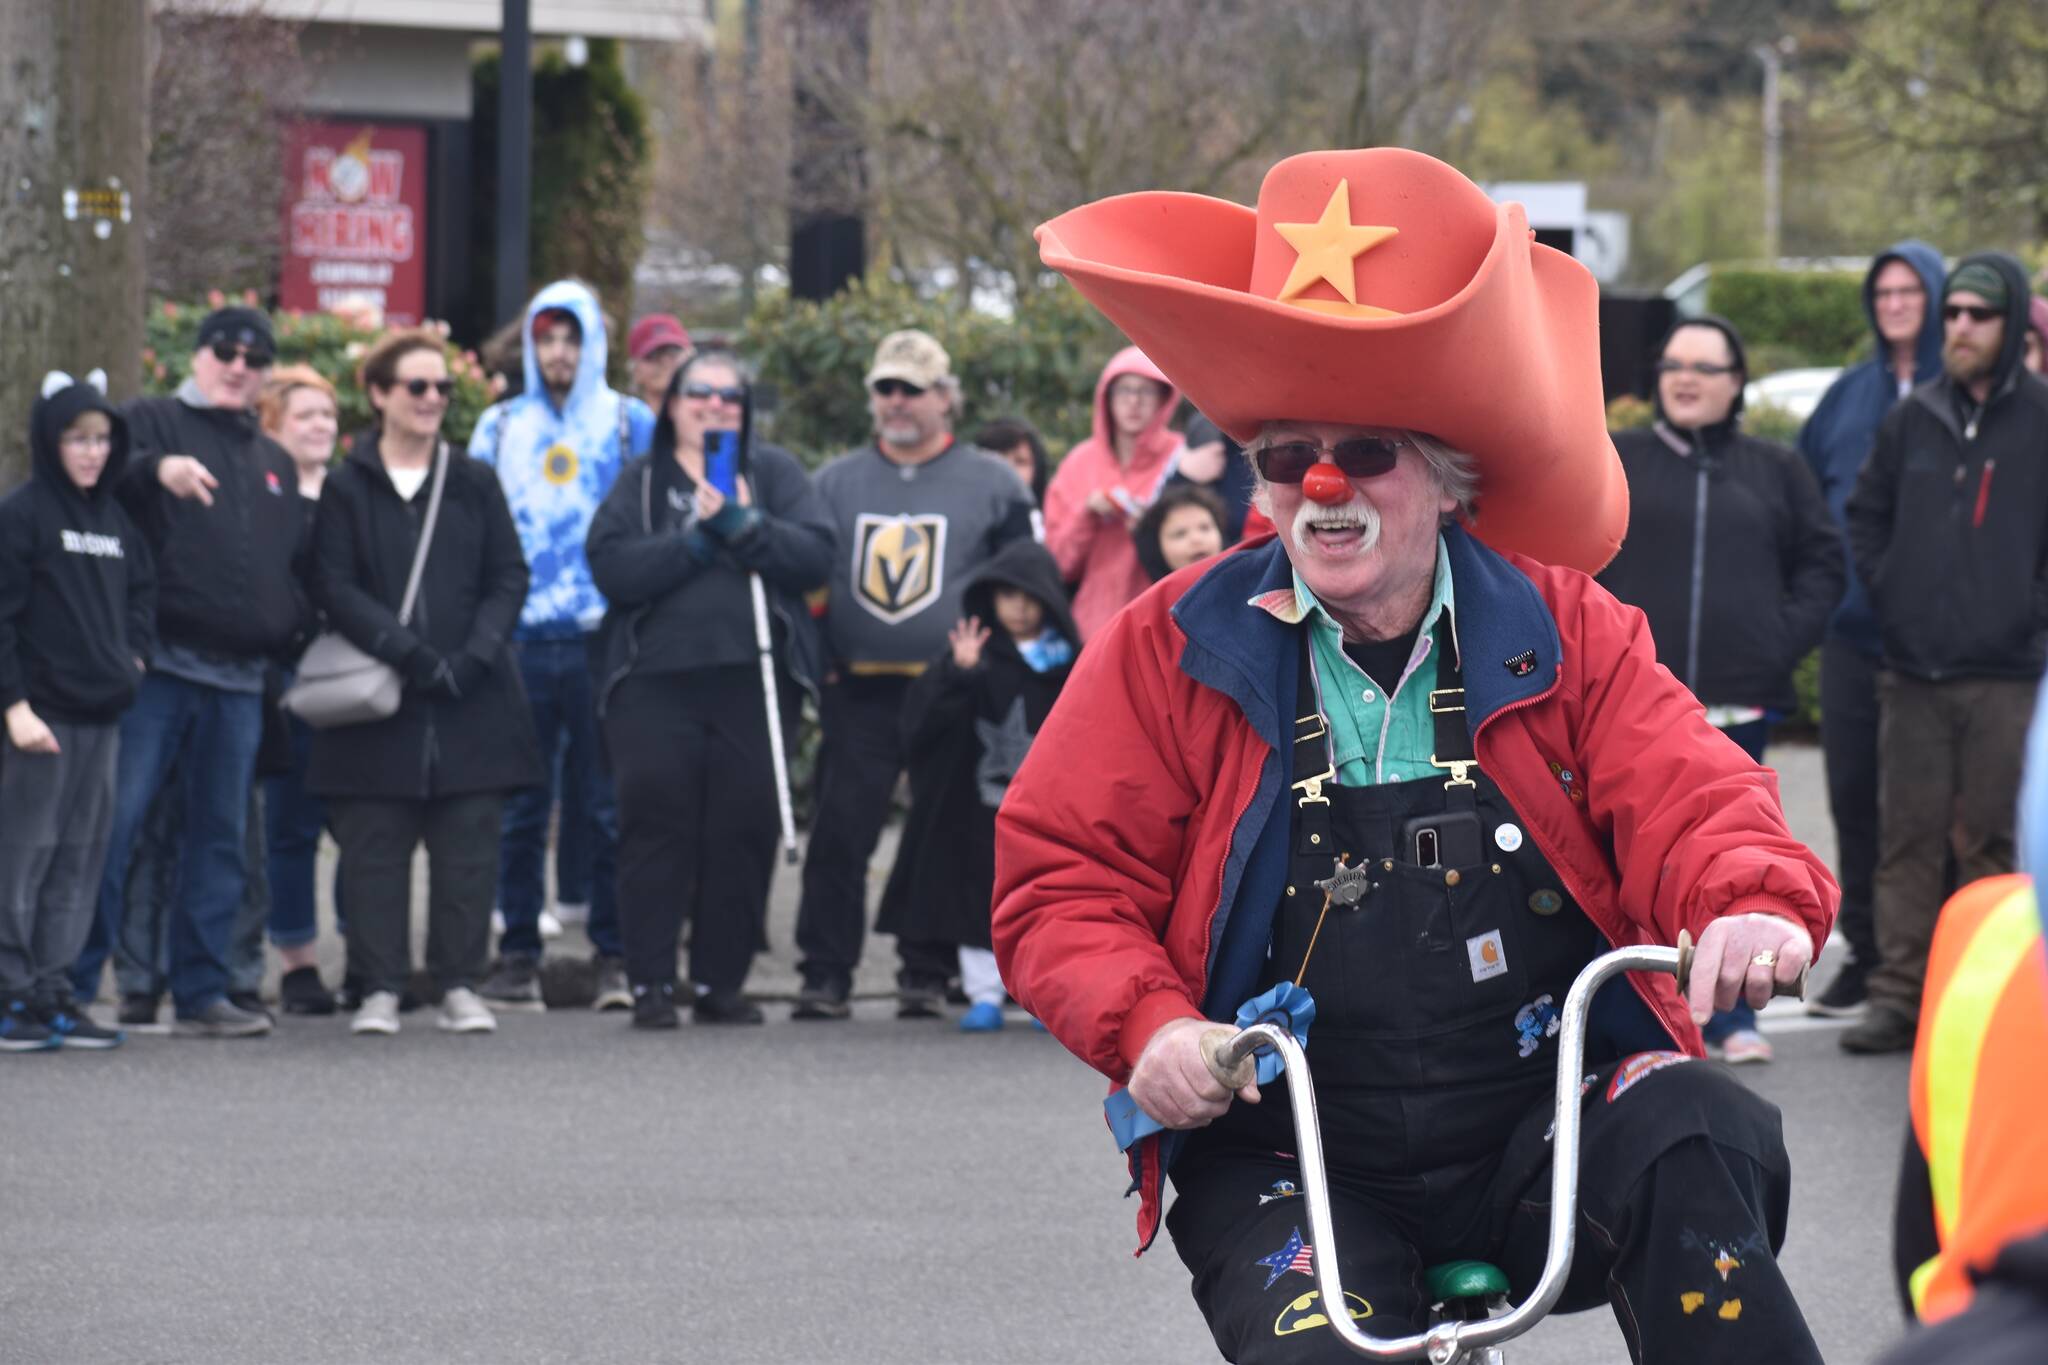 Clowns took to the streets during the Daffodil Parade in Puyallup. Photo by Alex Bruell